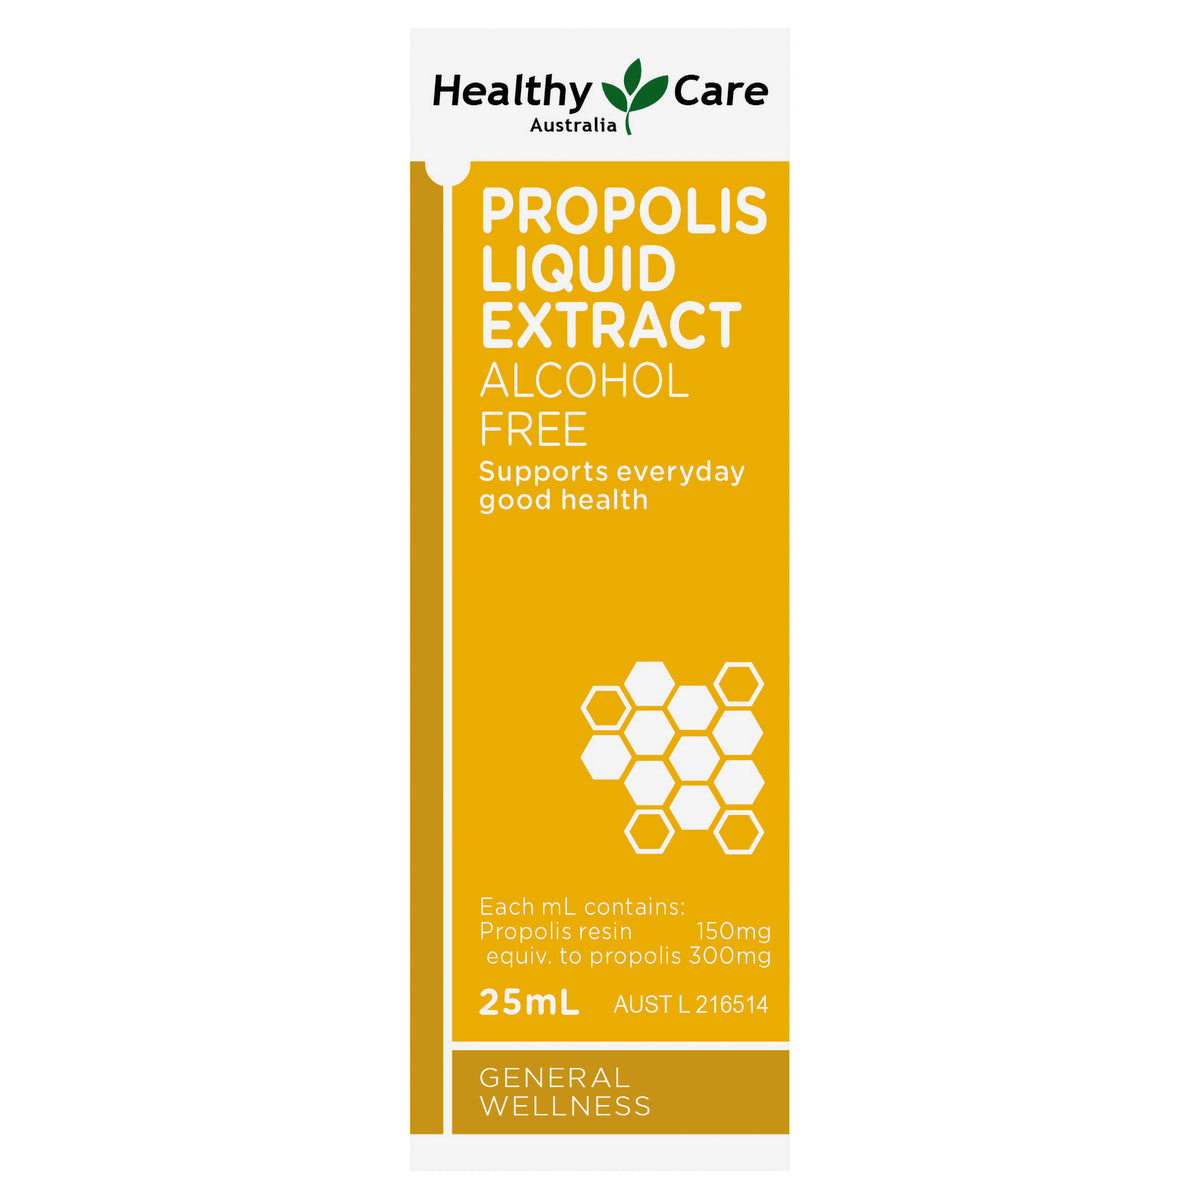 Side Label Showing Benefits of Propolis Liquid Extract Alcohol Free-Healthy Care Australia